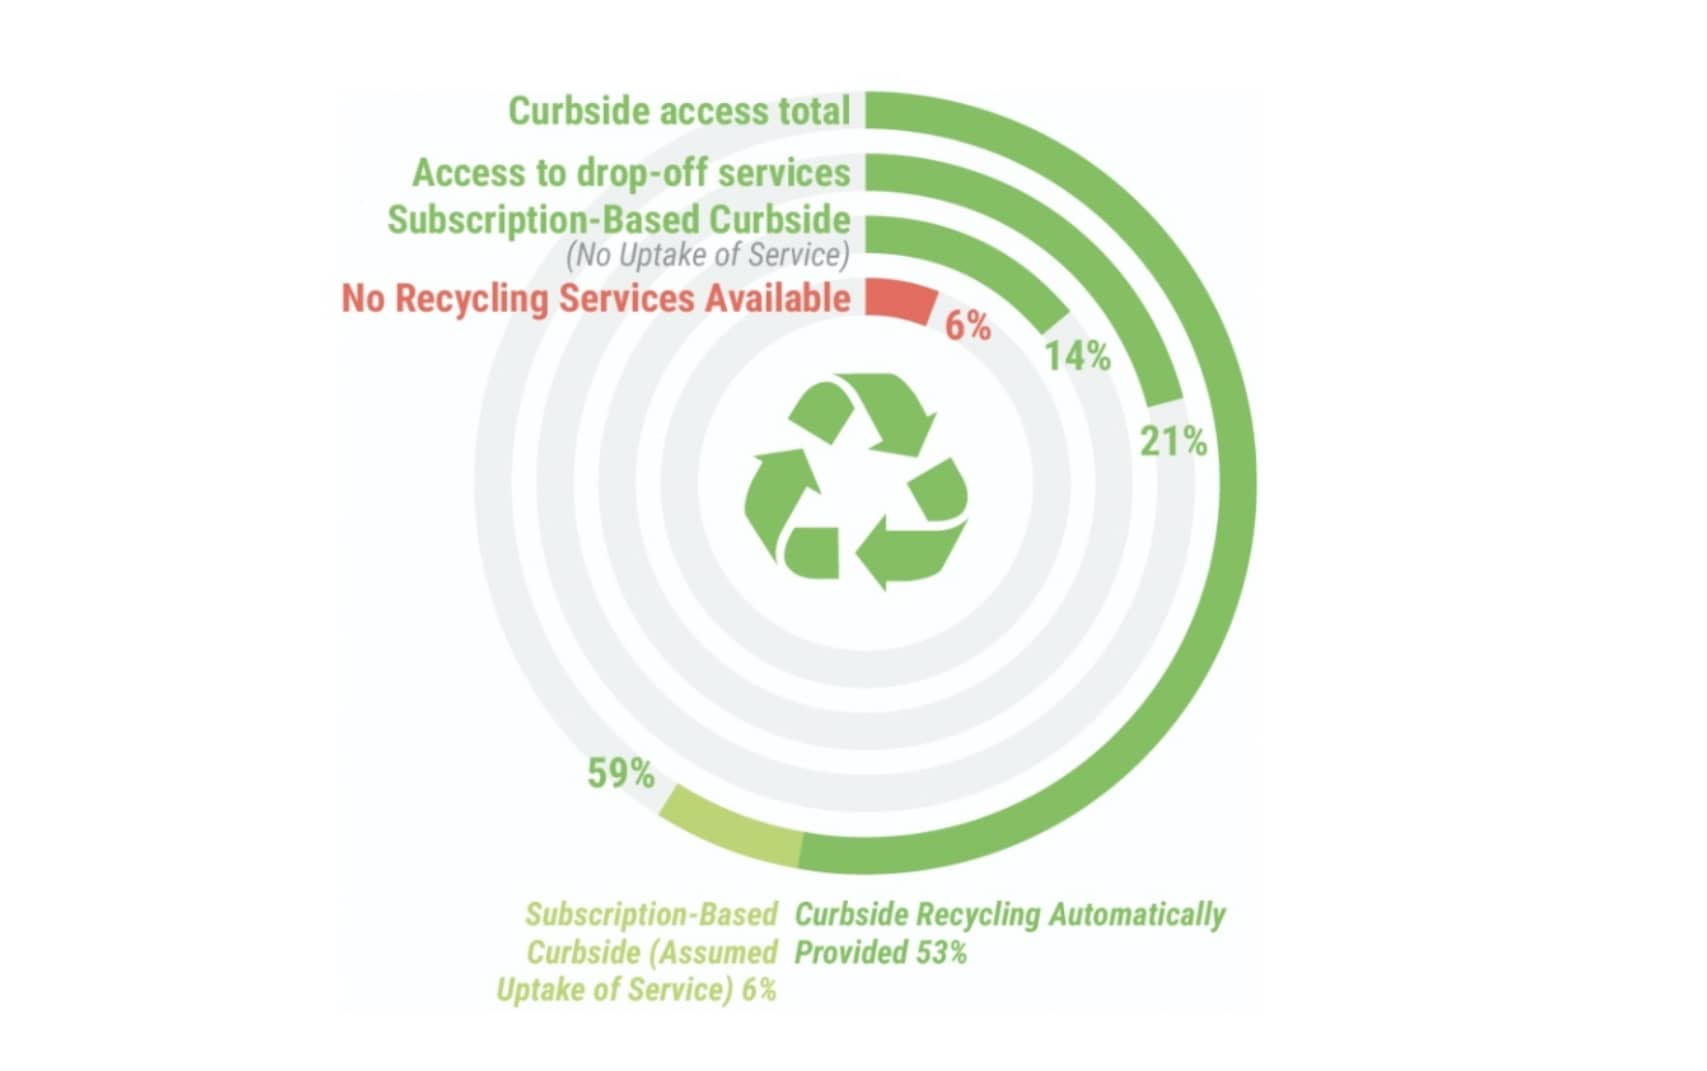 Estimated number of households with various types of recycling access, adapted from the 2020 State of Curbside Recycling Report by The Recycling Partnership